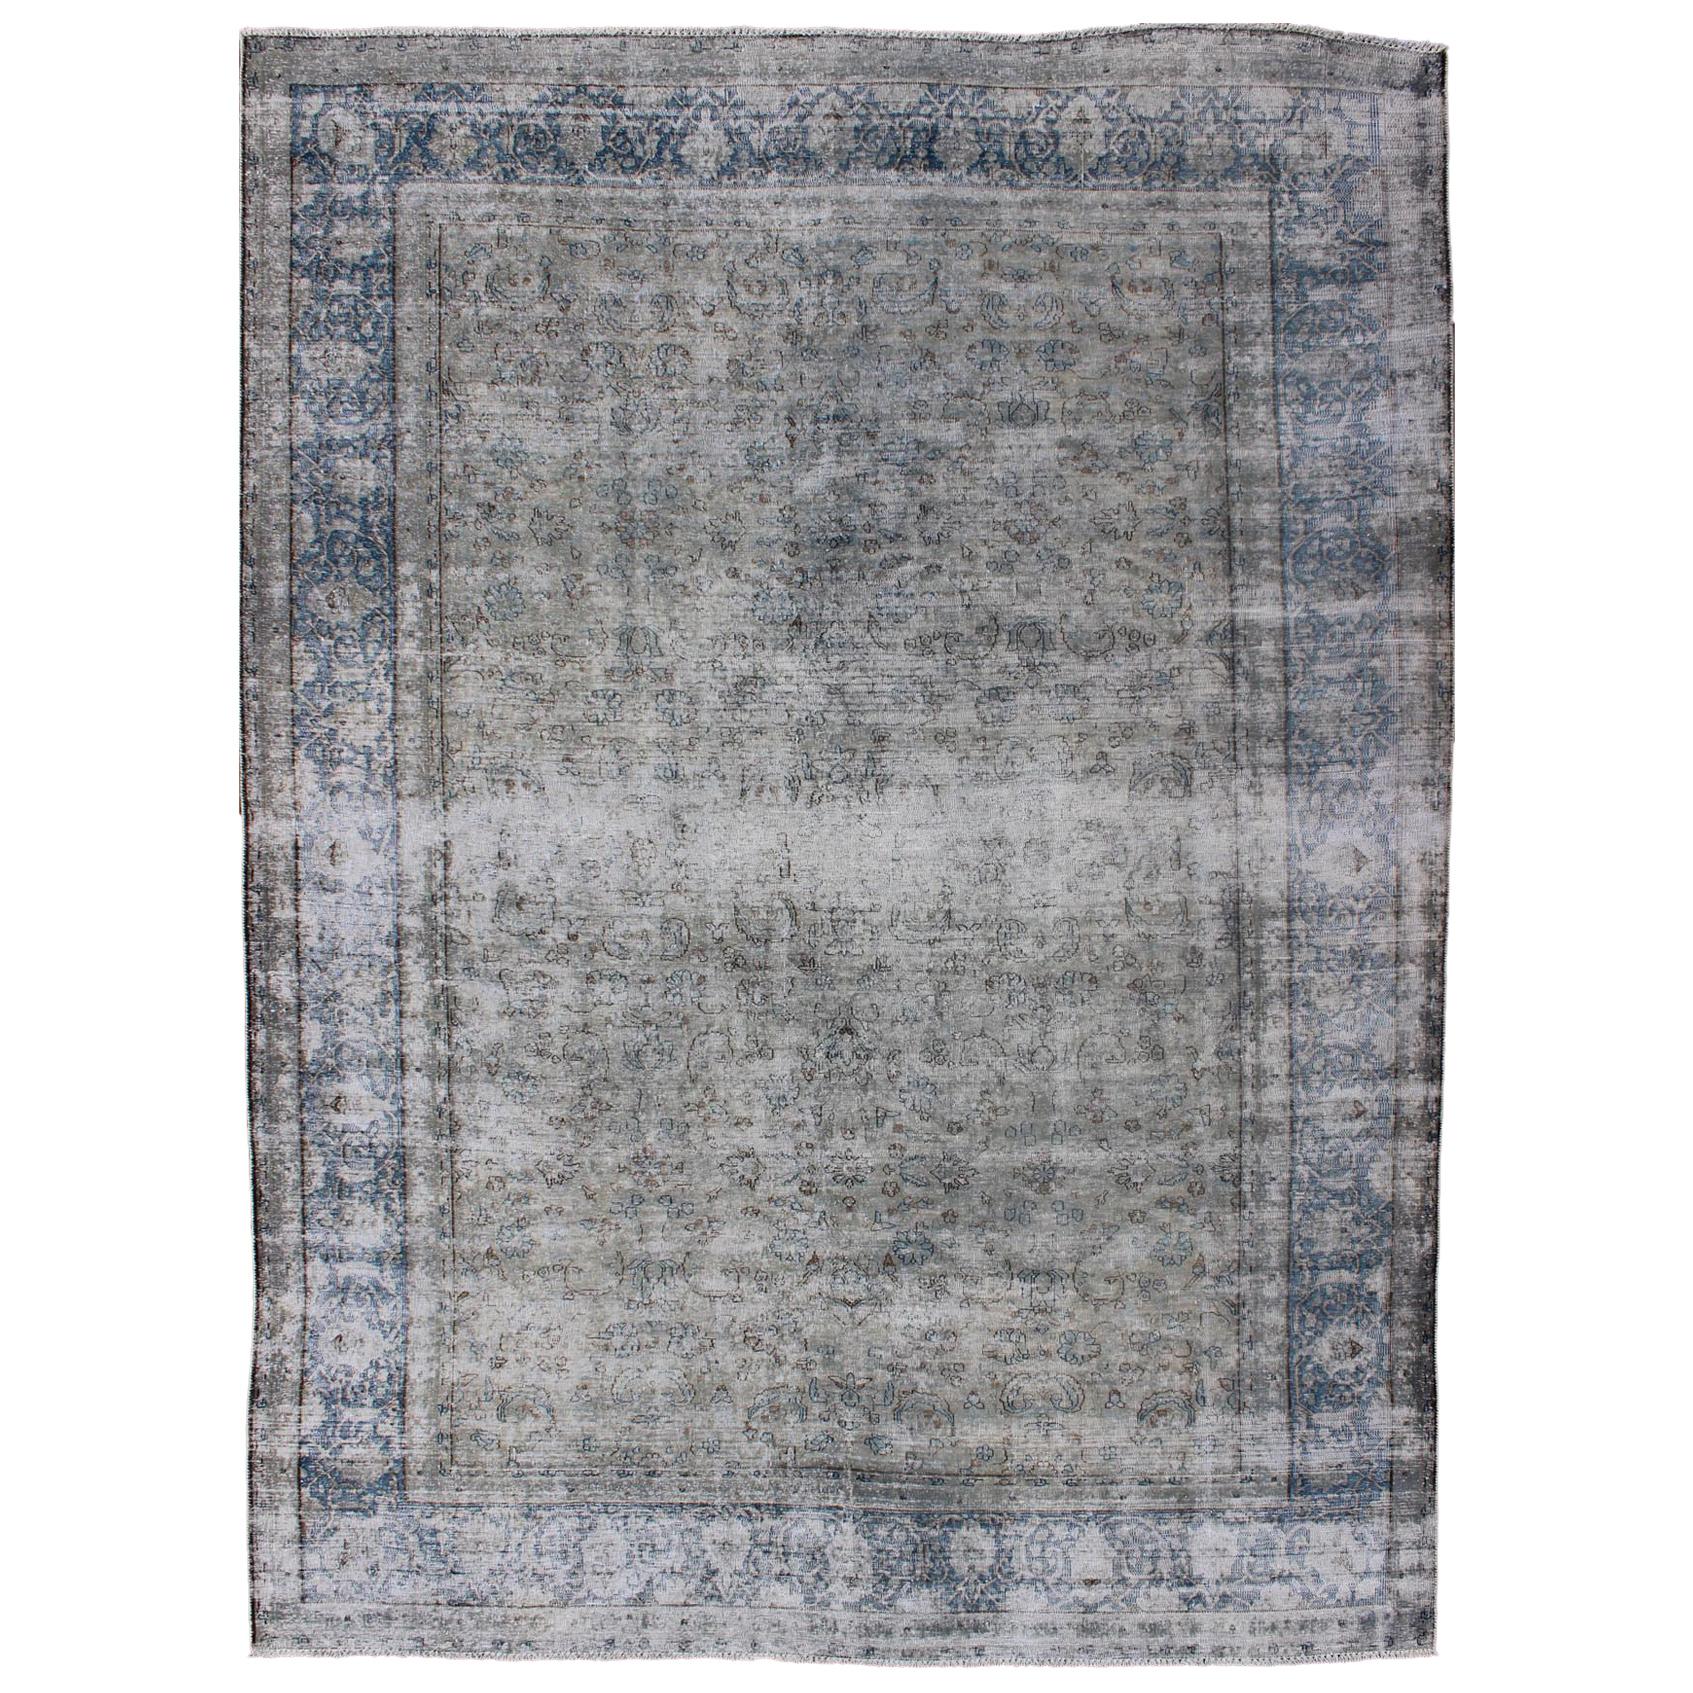 Blue/Gray Vintage Persian Distressed Rug with Modern and Rustic Design